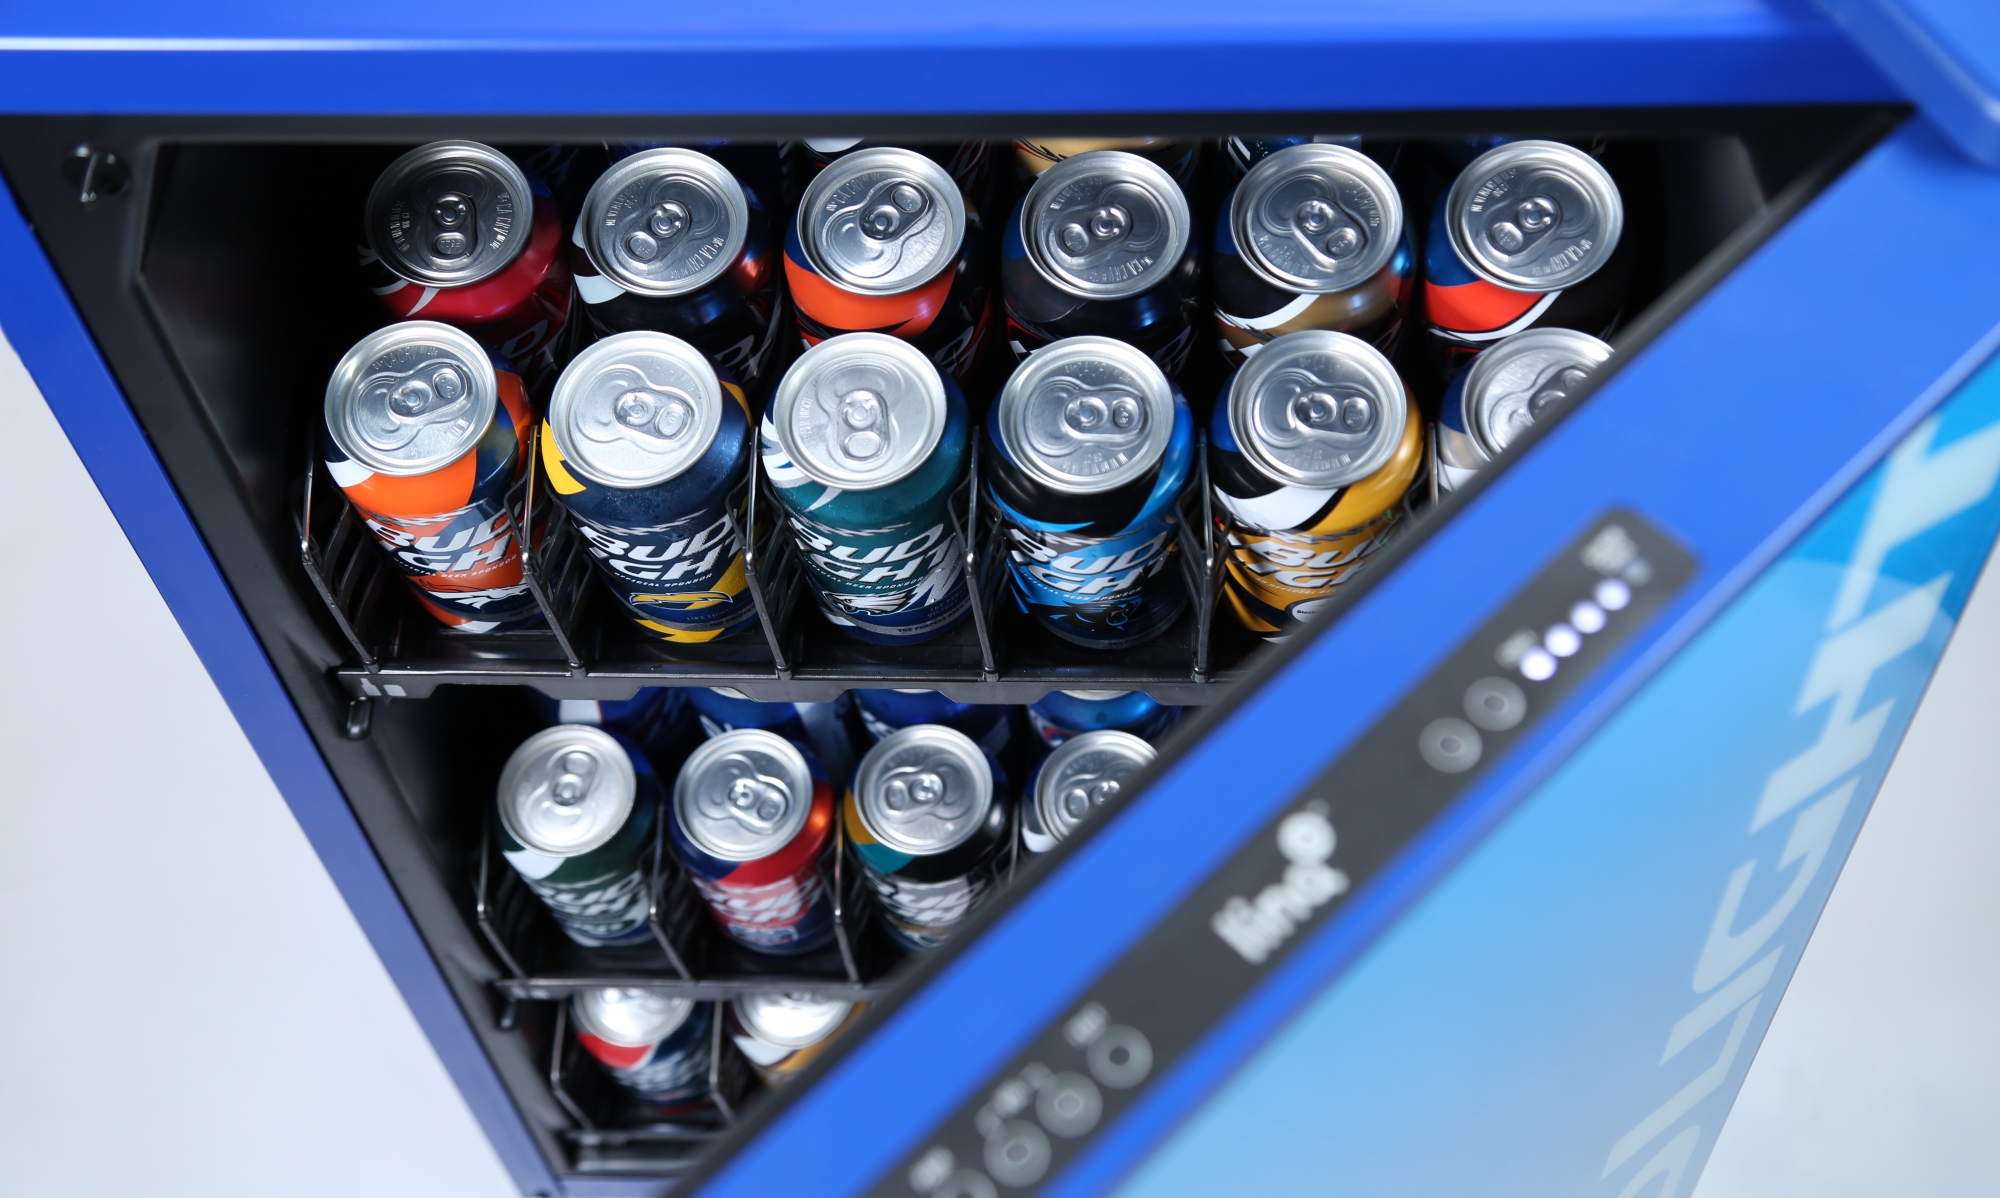 Bud Light Launches a Smart Fridge for Beer and NFL Alerts